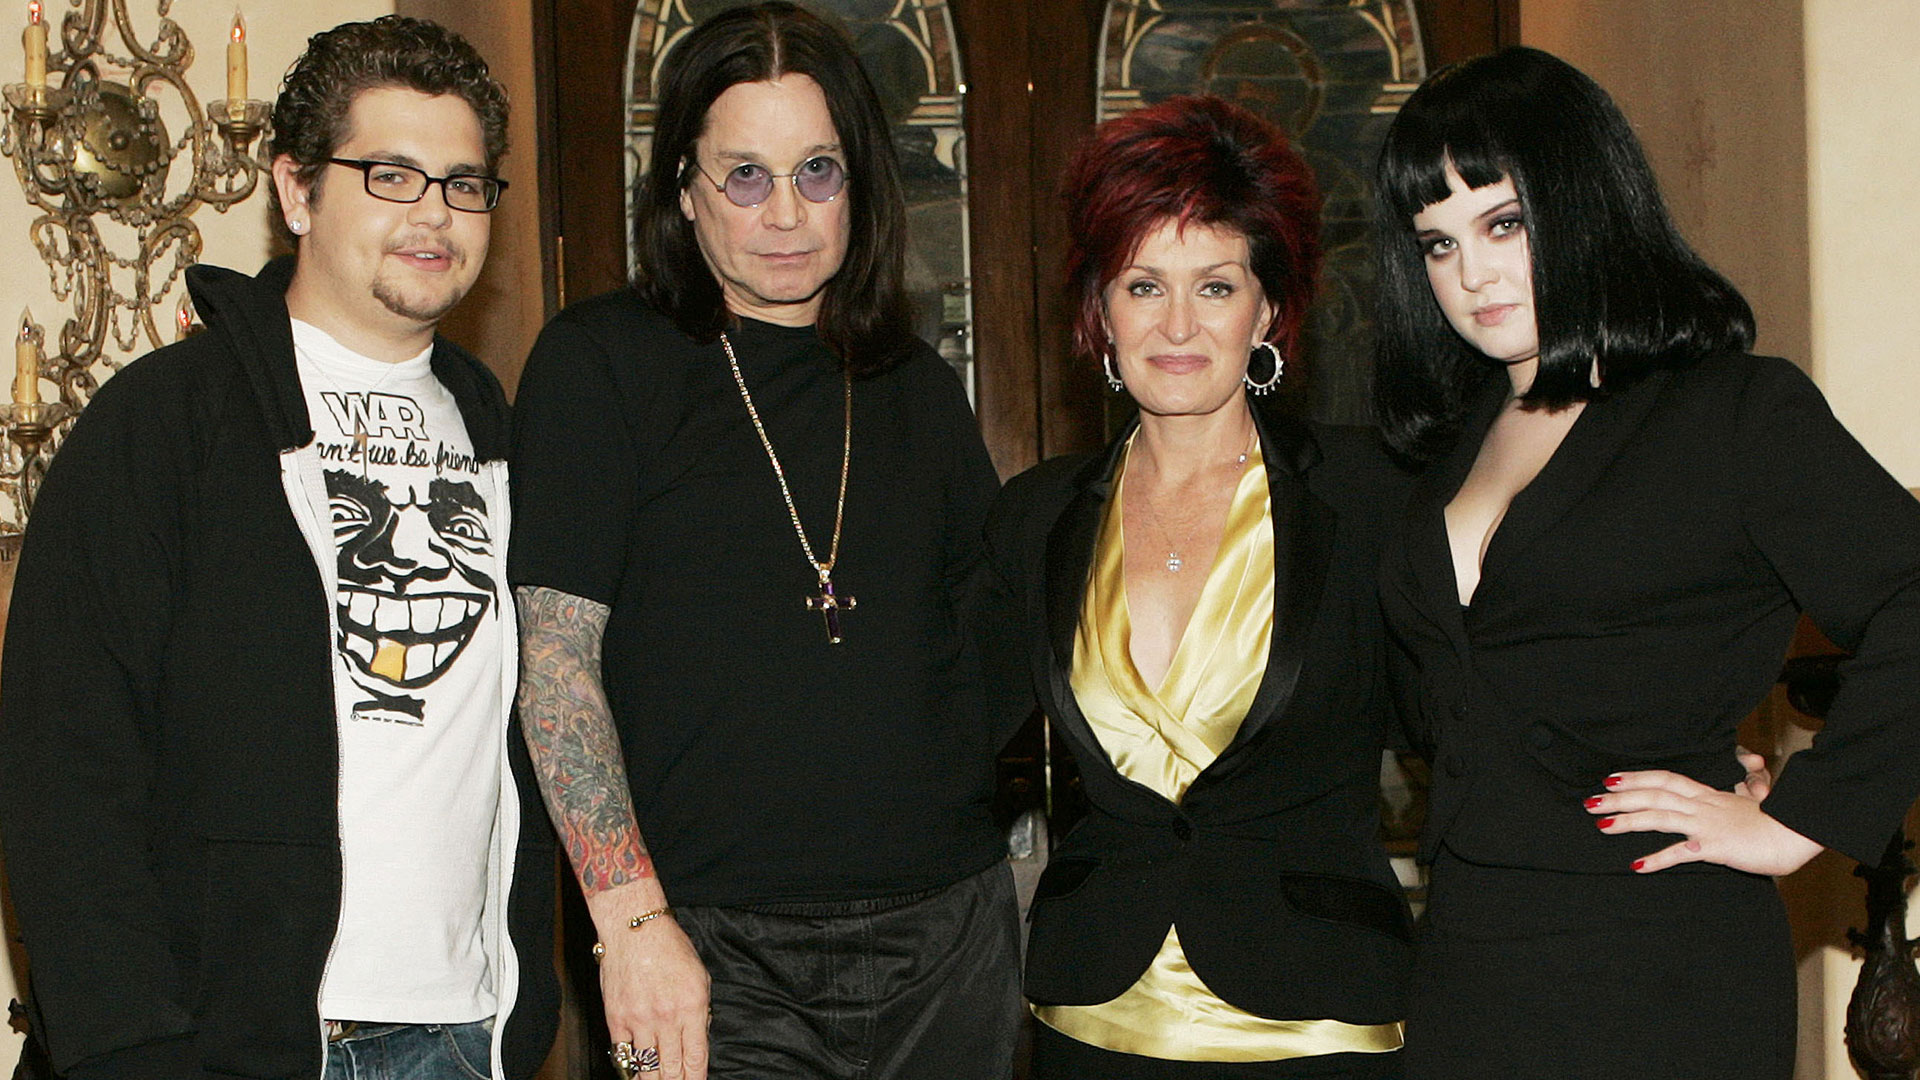 The 10 Most Outrageous Moments From 'The Osbournes'